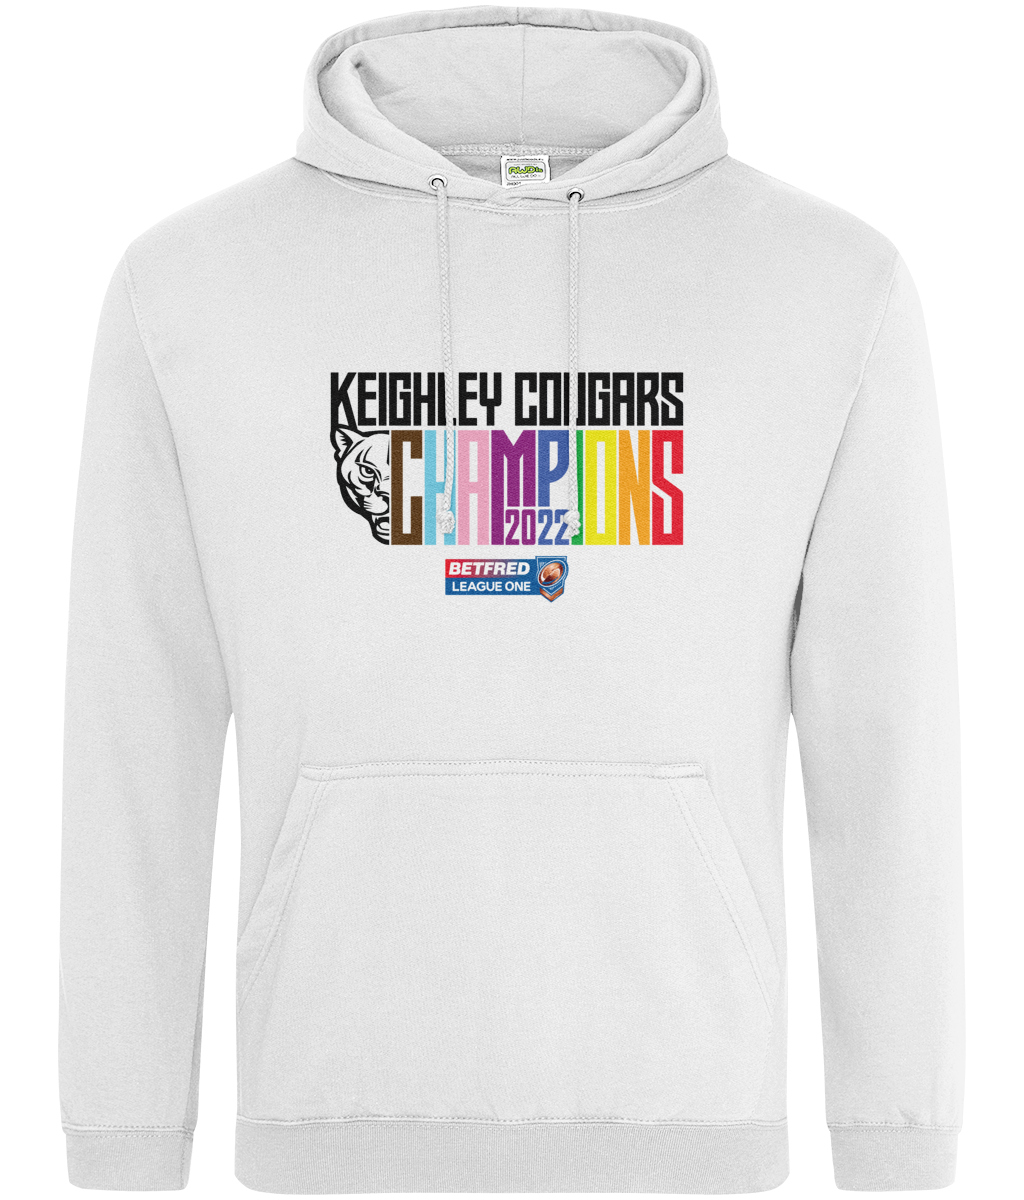 Keighley Cougars 2022 Champions Hoodie White